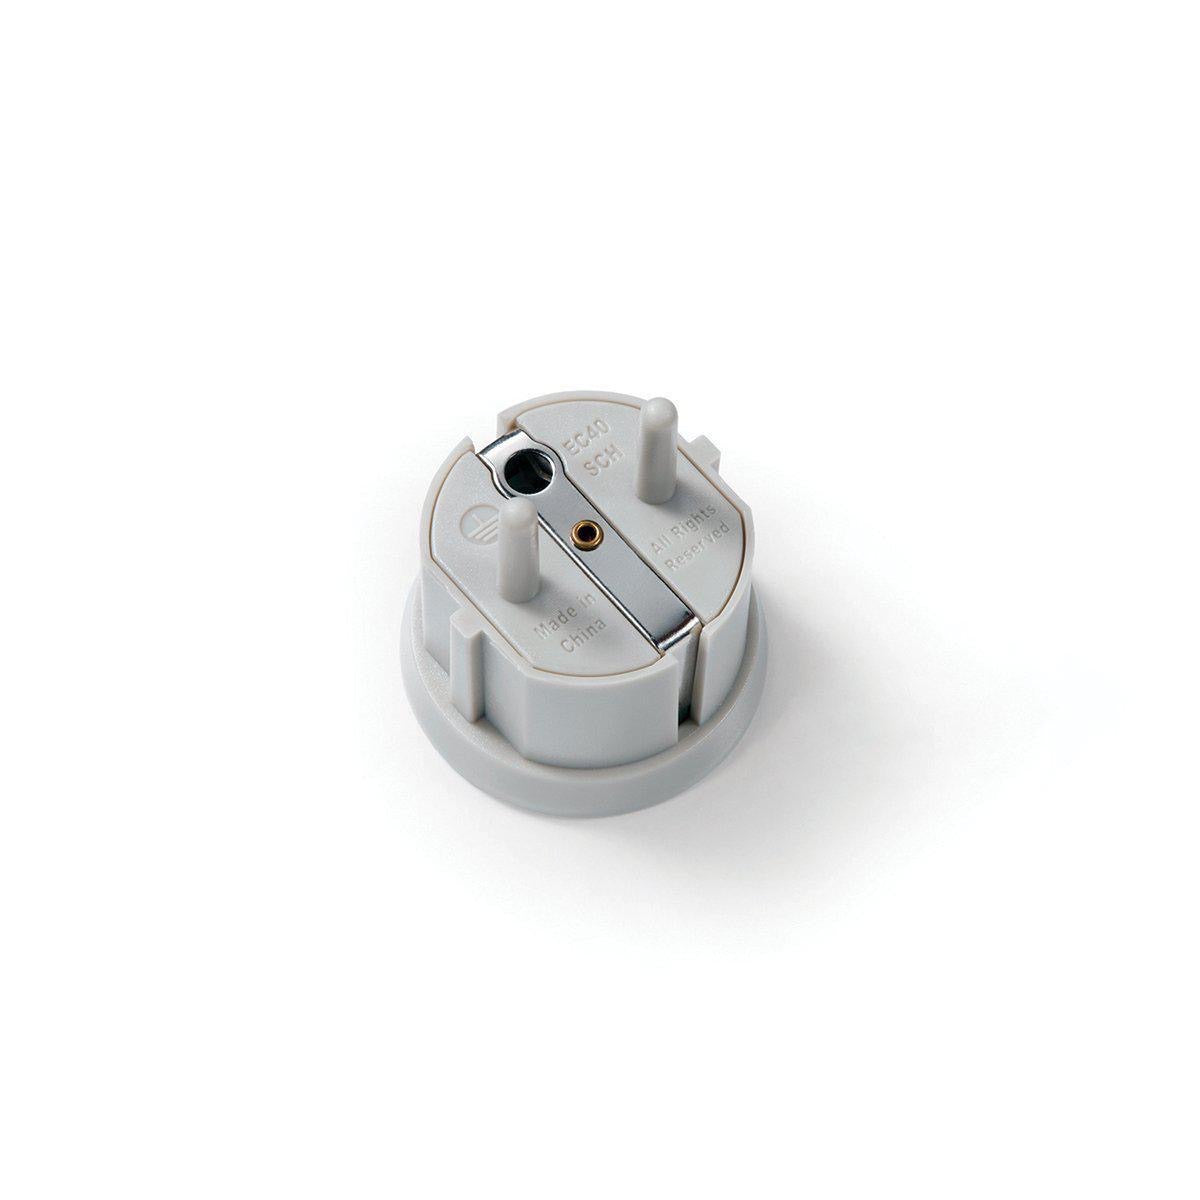 Safety Adapter (Europe Type F)